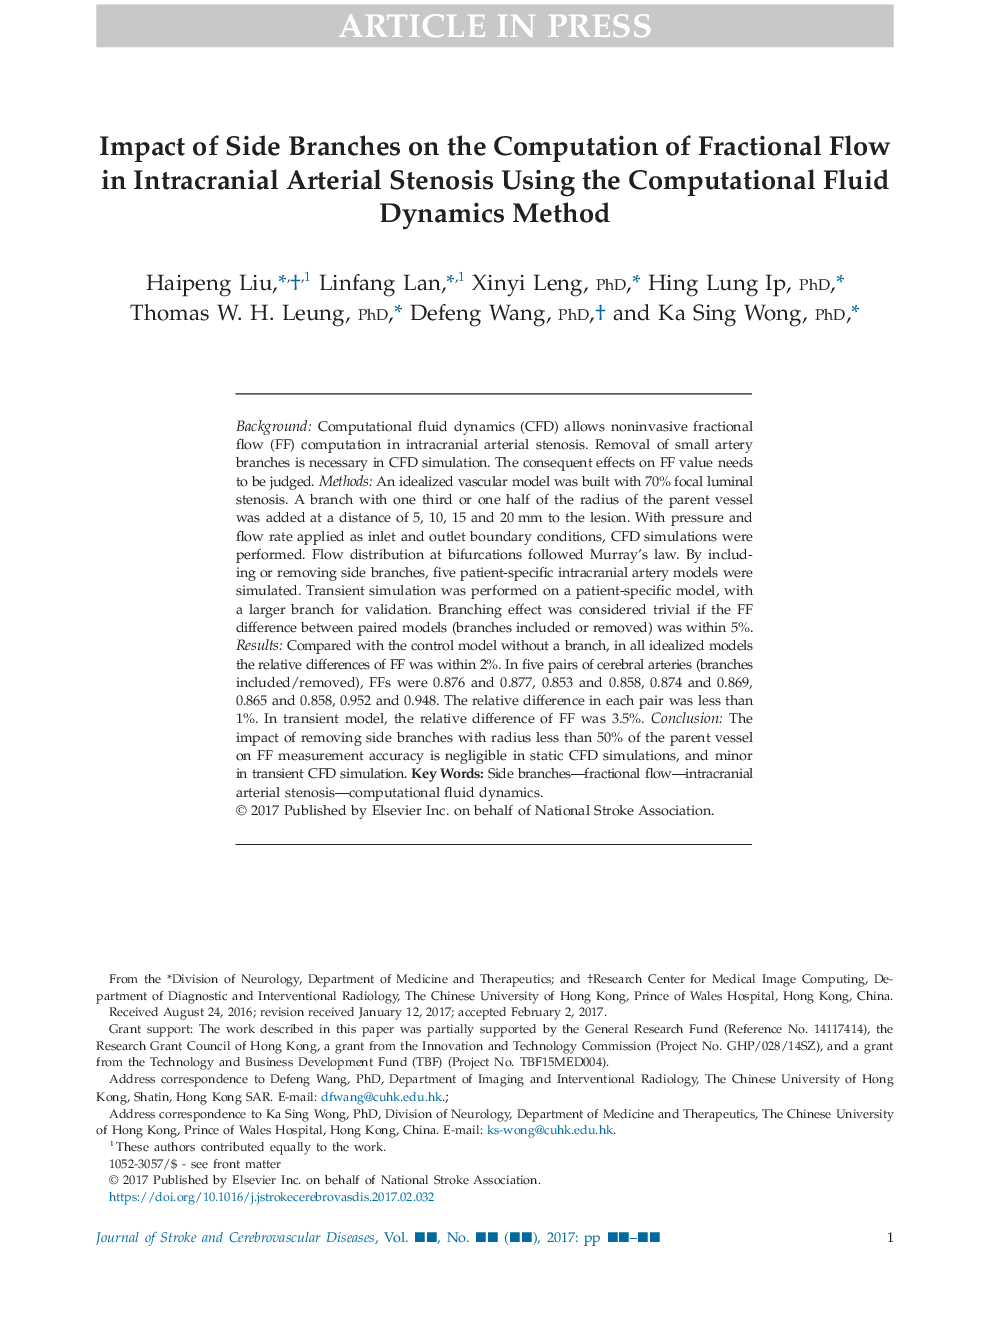 Impact of Side Branches on the Computation of Fractional Flow in Intracranial Arterial Stenosis Using the Computational Fluid Dynamics Method